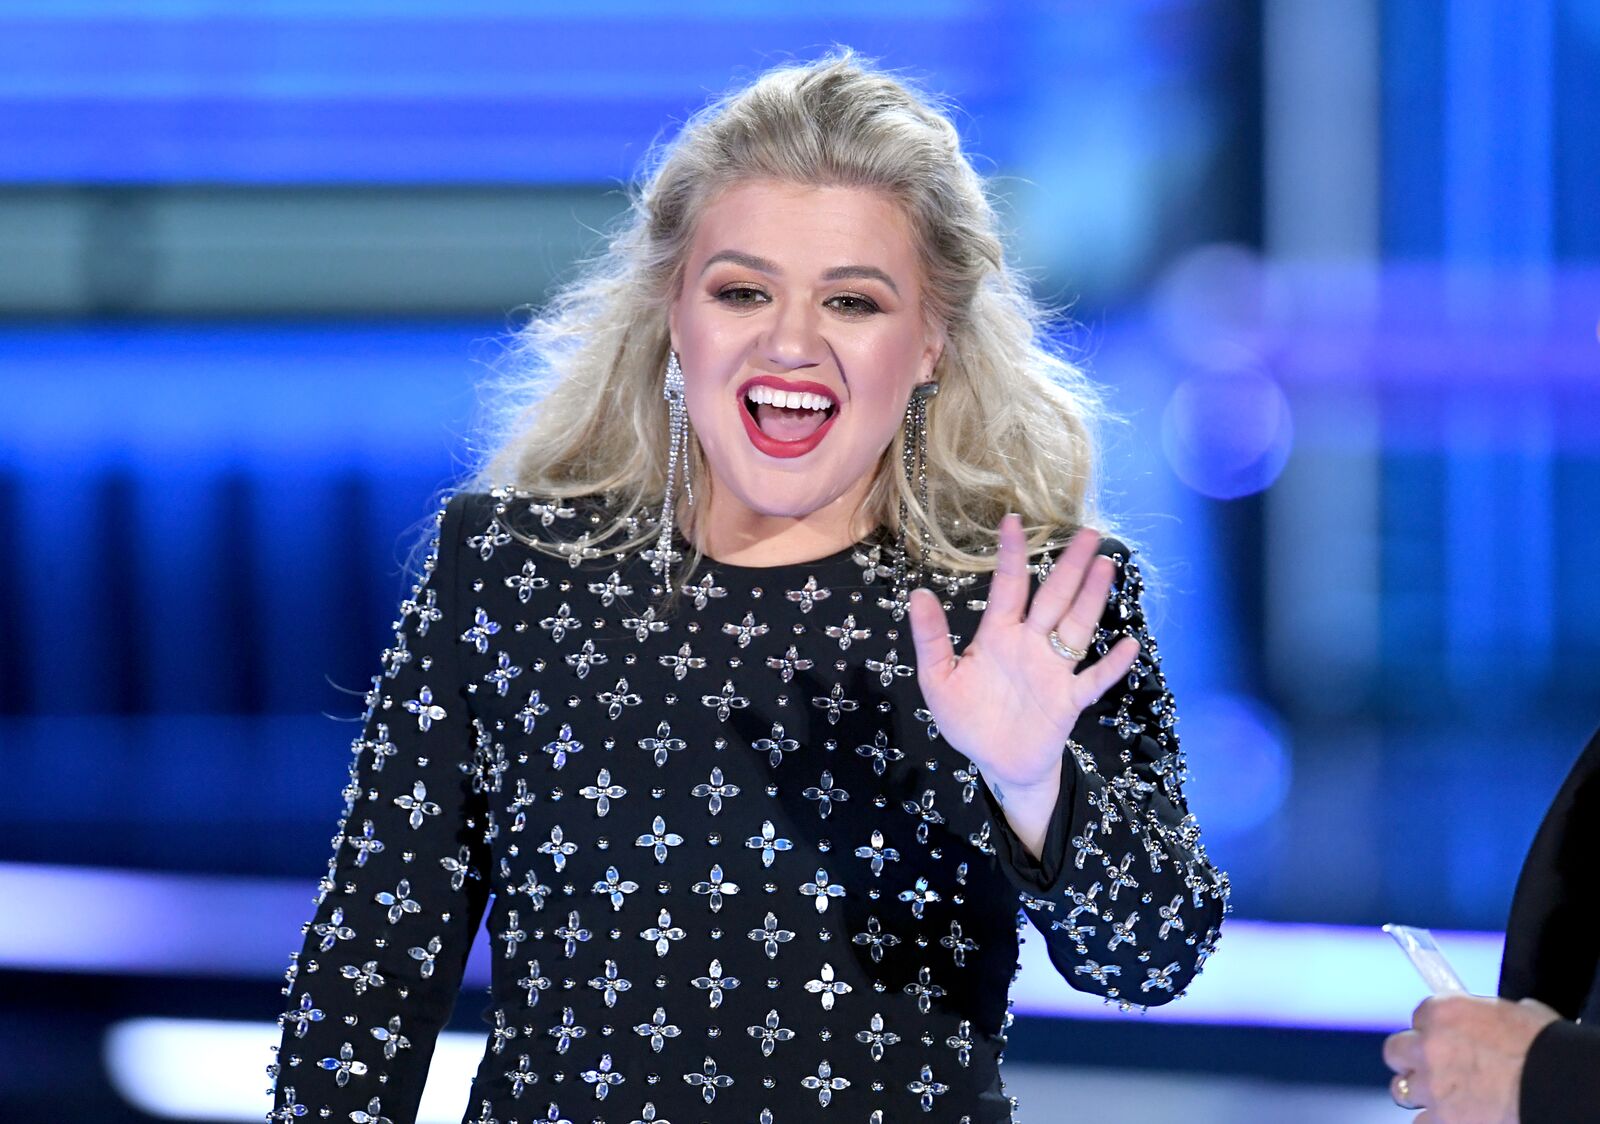 Kelly Clarkson at the Billboard Music Awards on May 01, 2019, in Las Vegas, Nevada | Photo: Kevin Winter/Getty Images